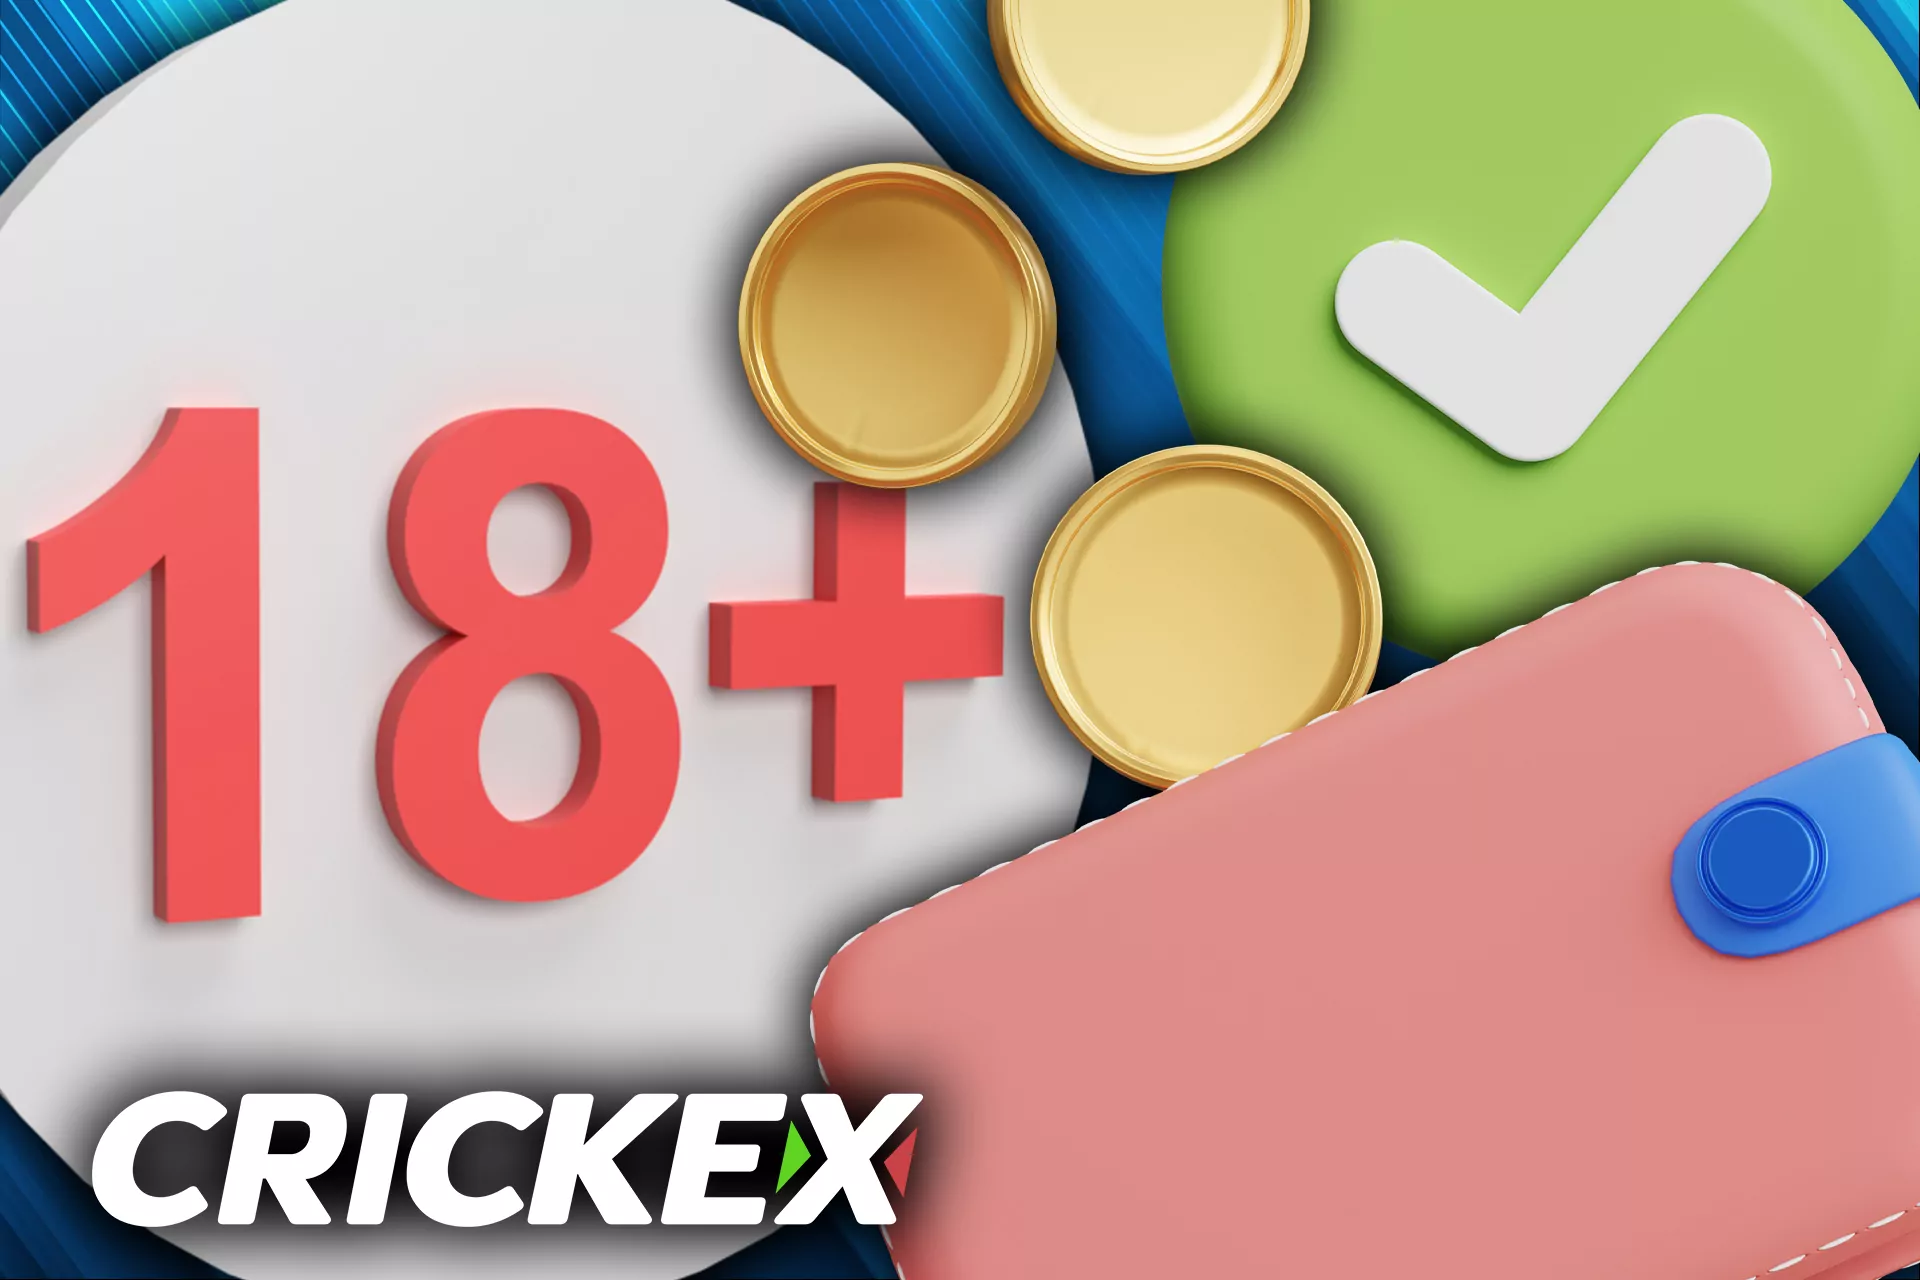 You must be a verified 18-years-old user to withdraw your winnings from Crickex.